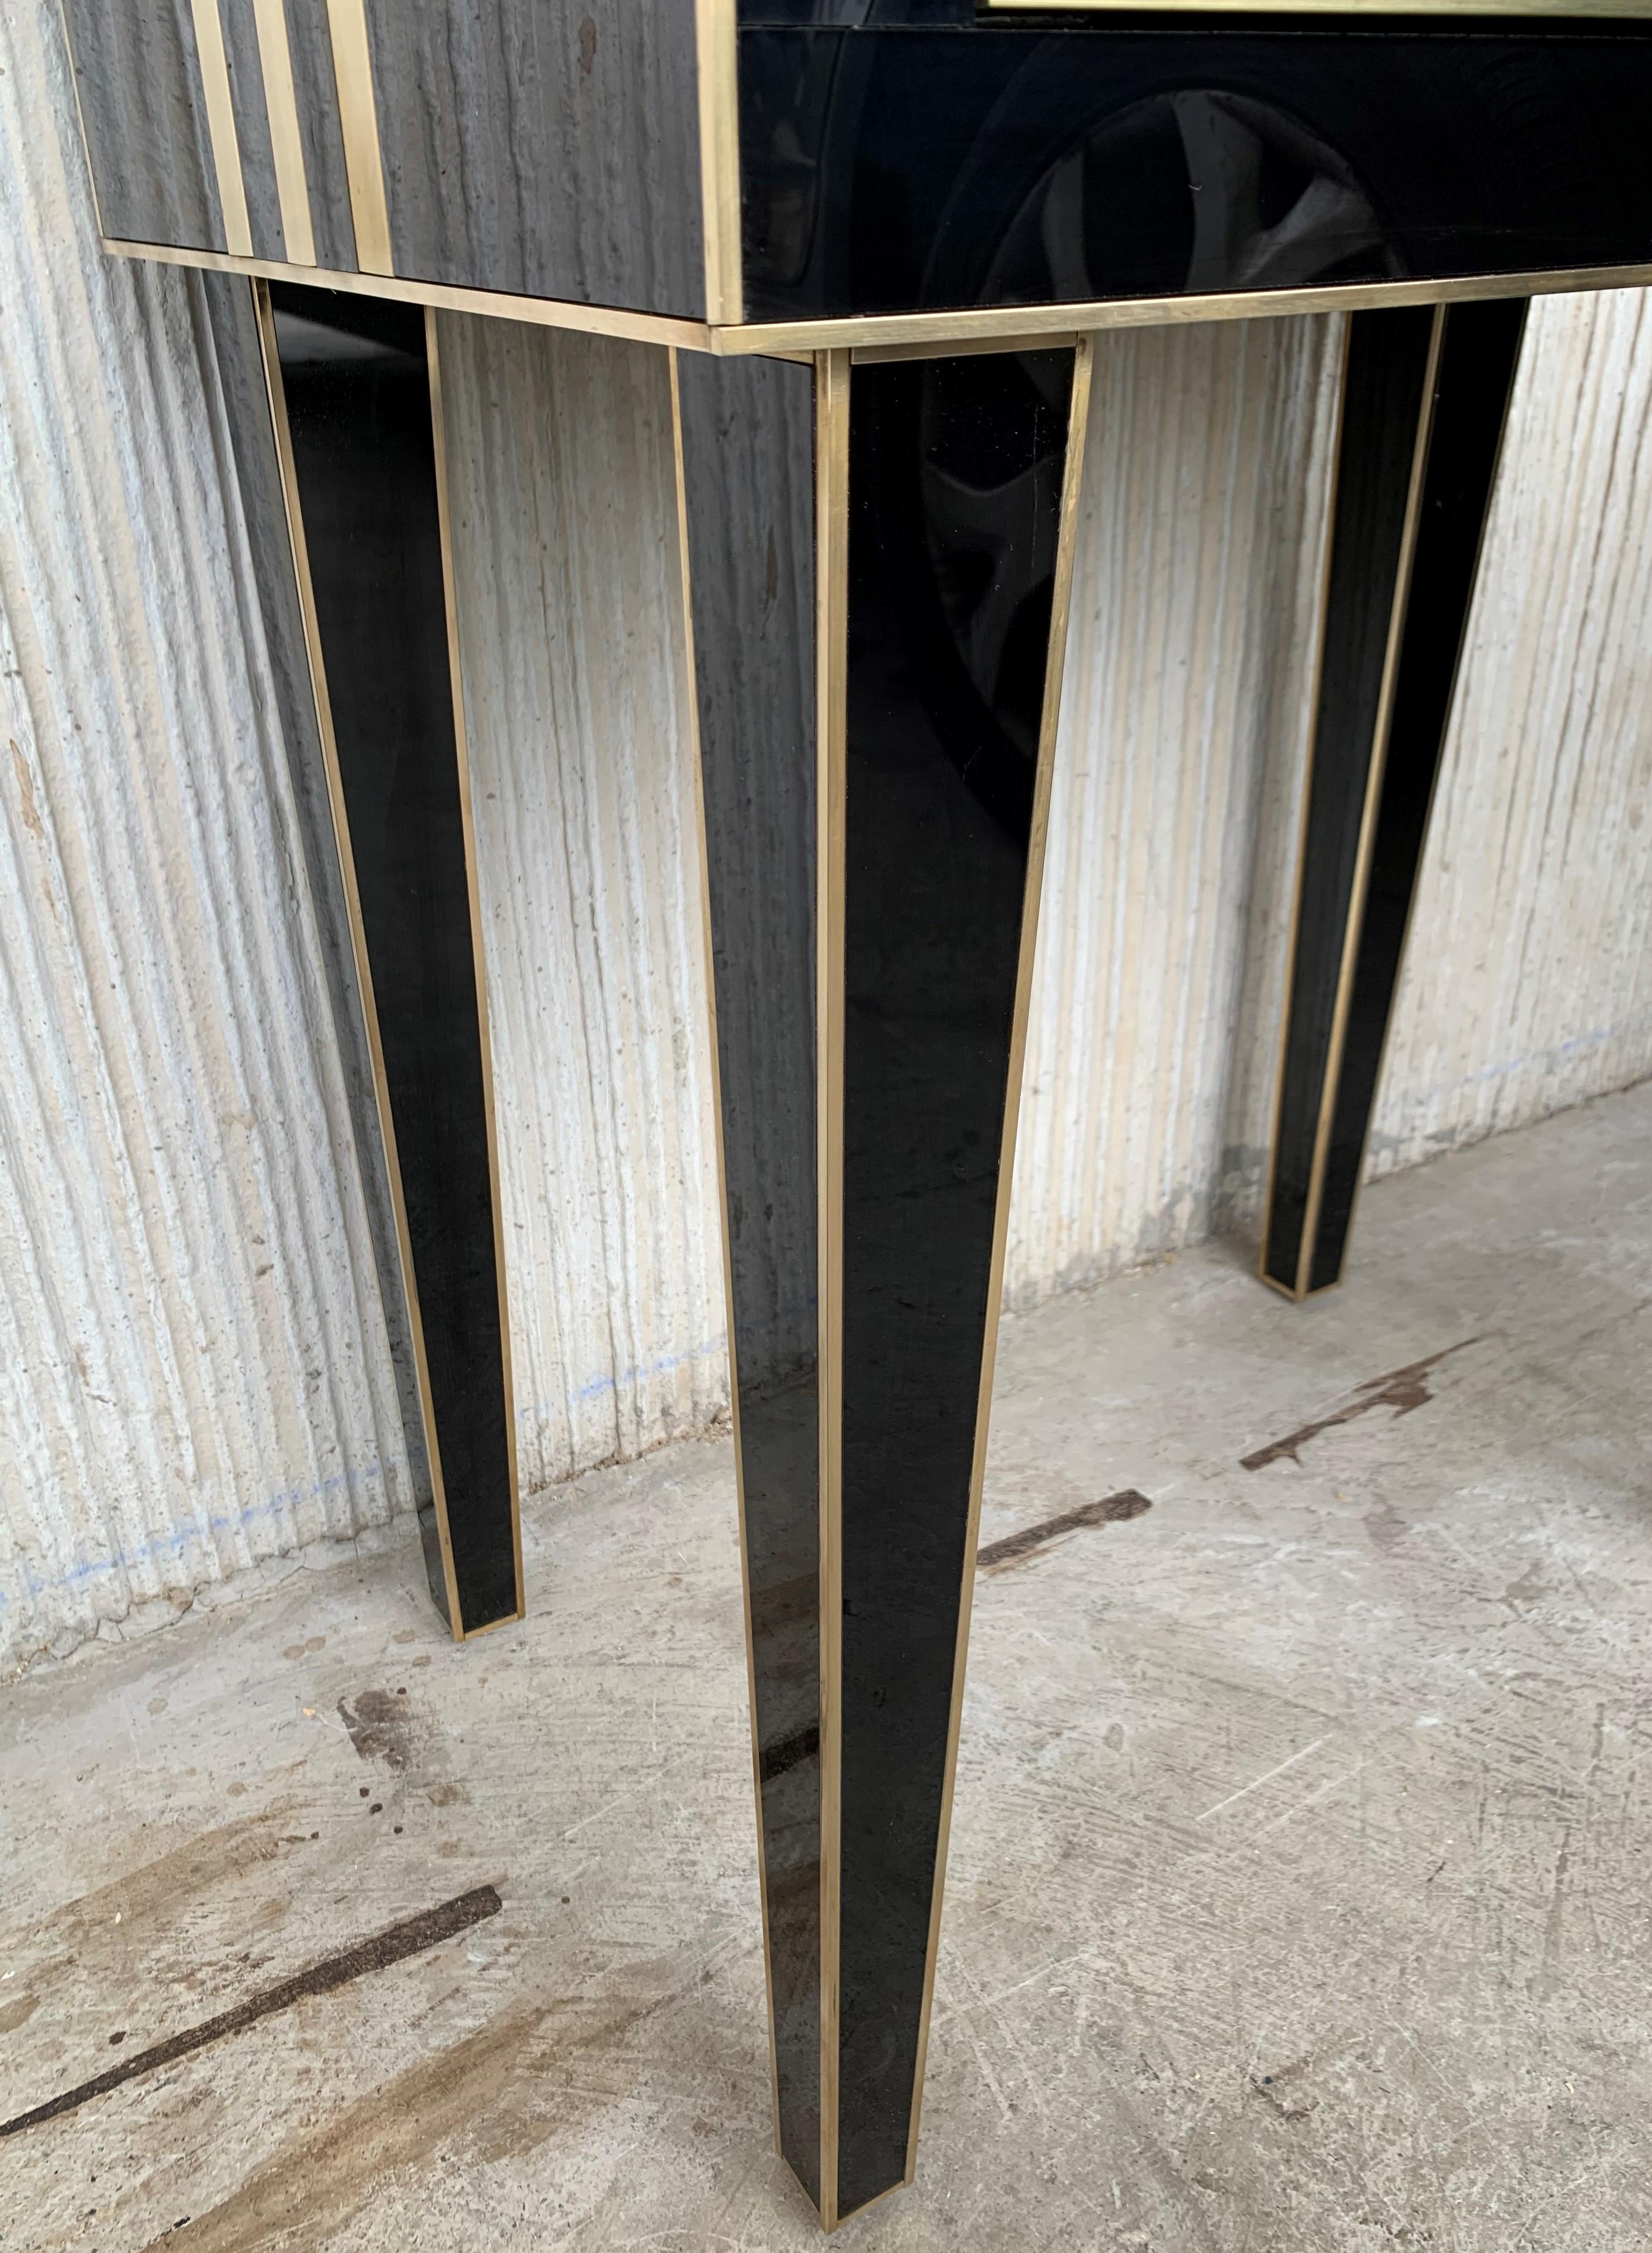 New Pair of High Black and Brass Nightstands with Drawer, Push System Opening 9